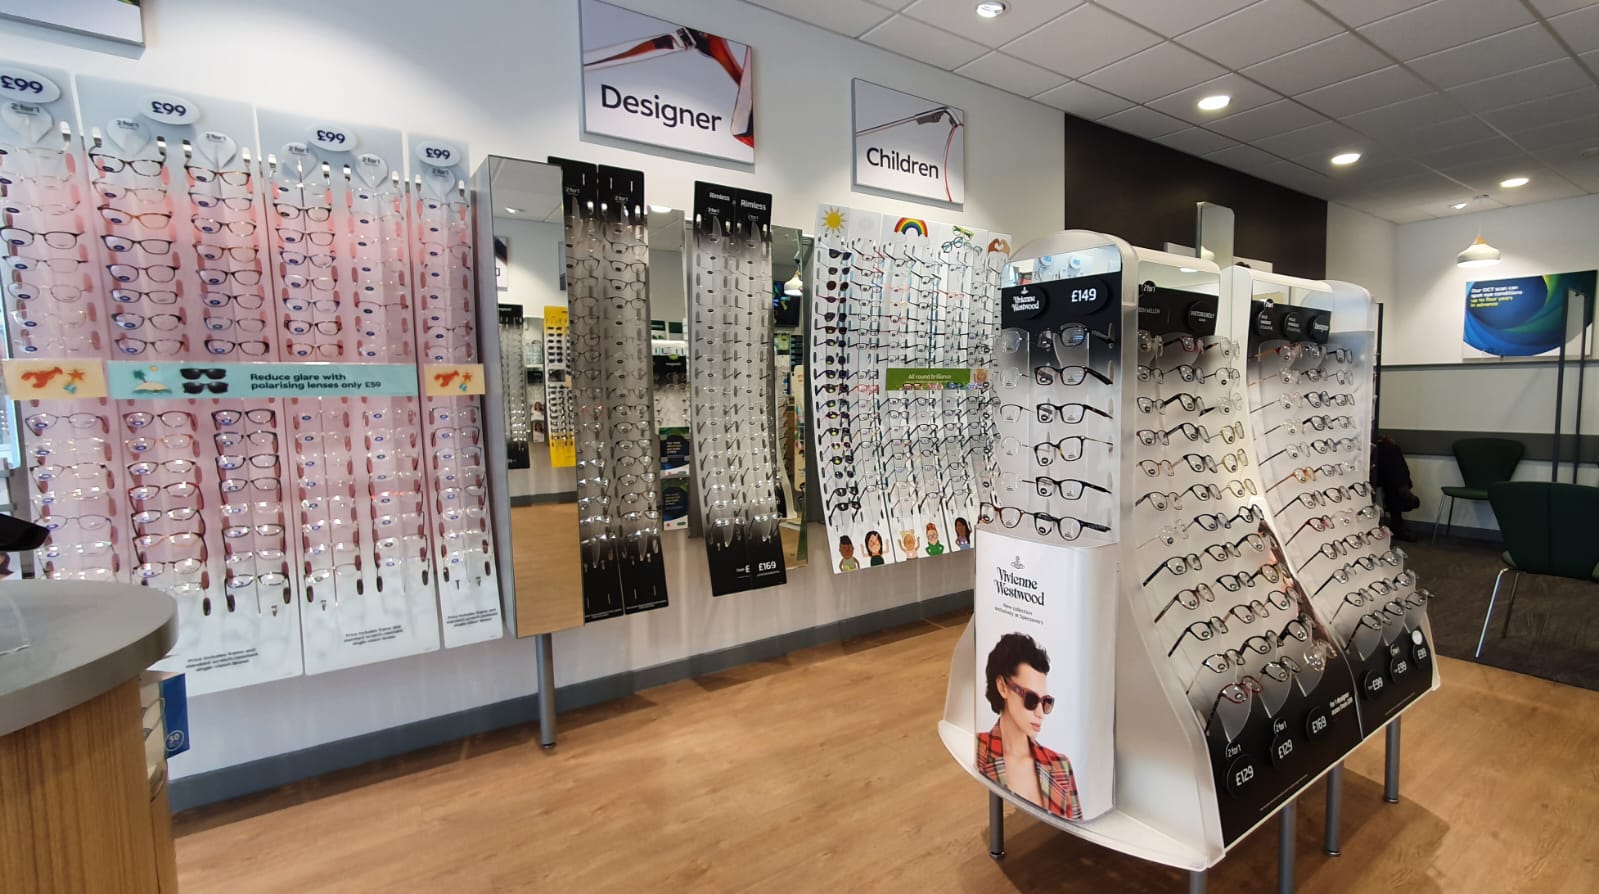 Glasgow Fort Specsavers Specsavers Opticians and Audiologists - Glasgow Fort Glasgow 01417 710871